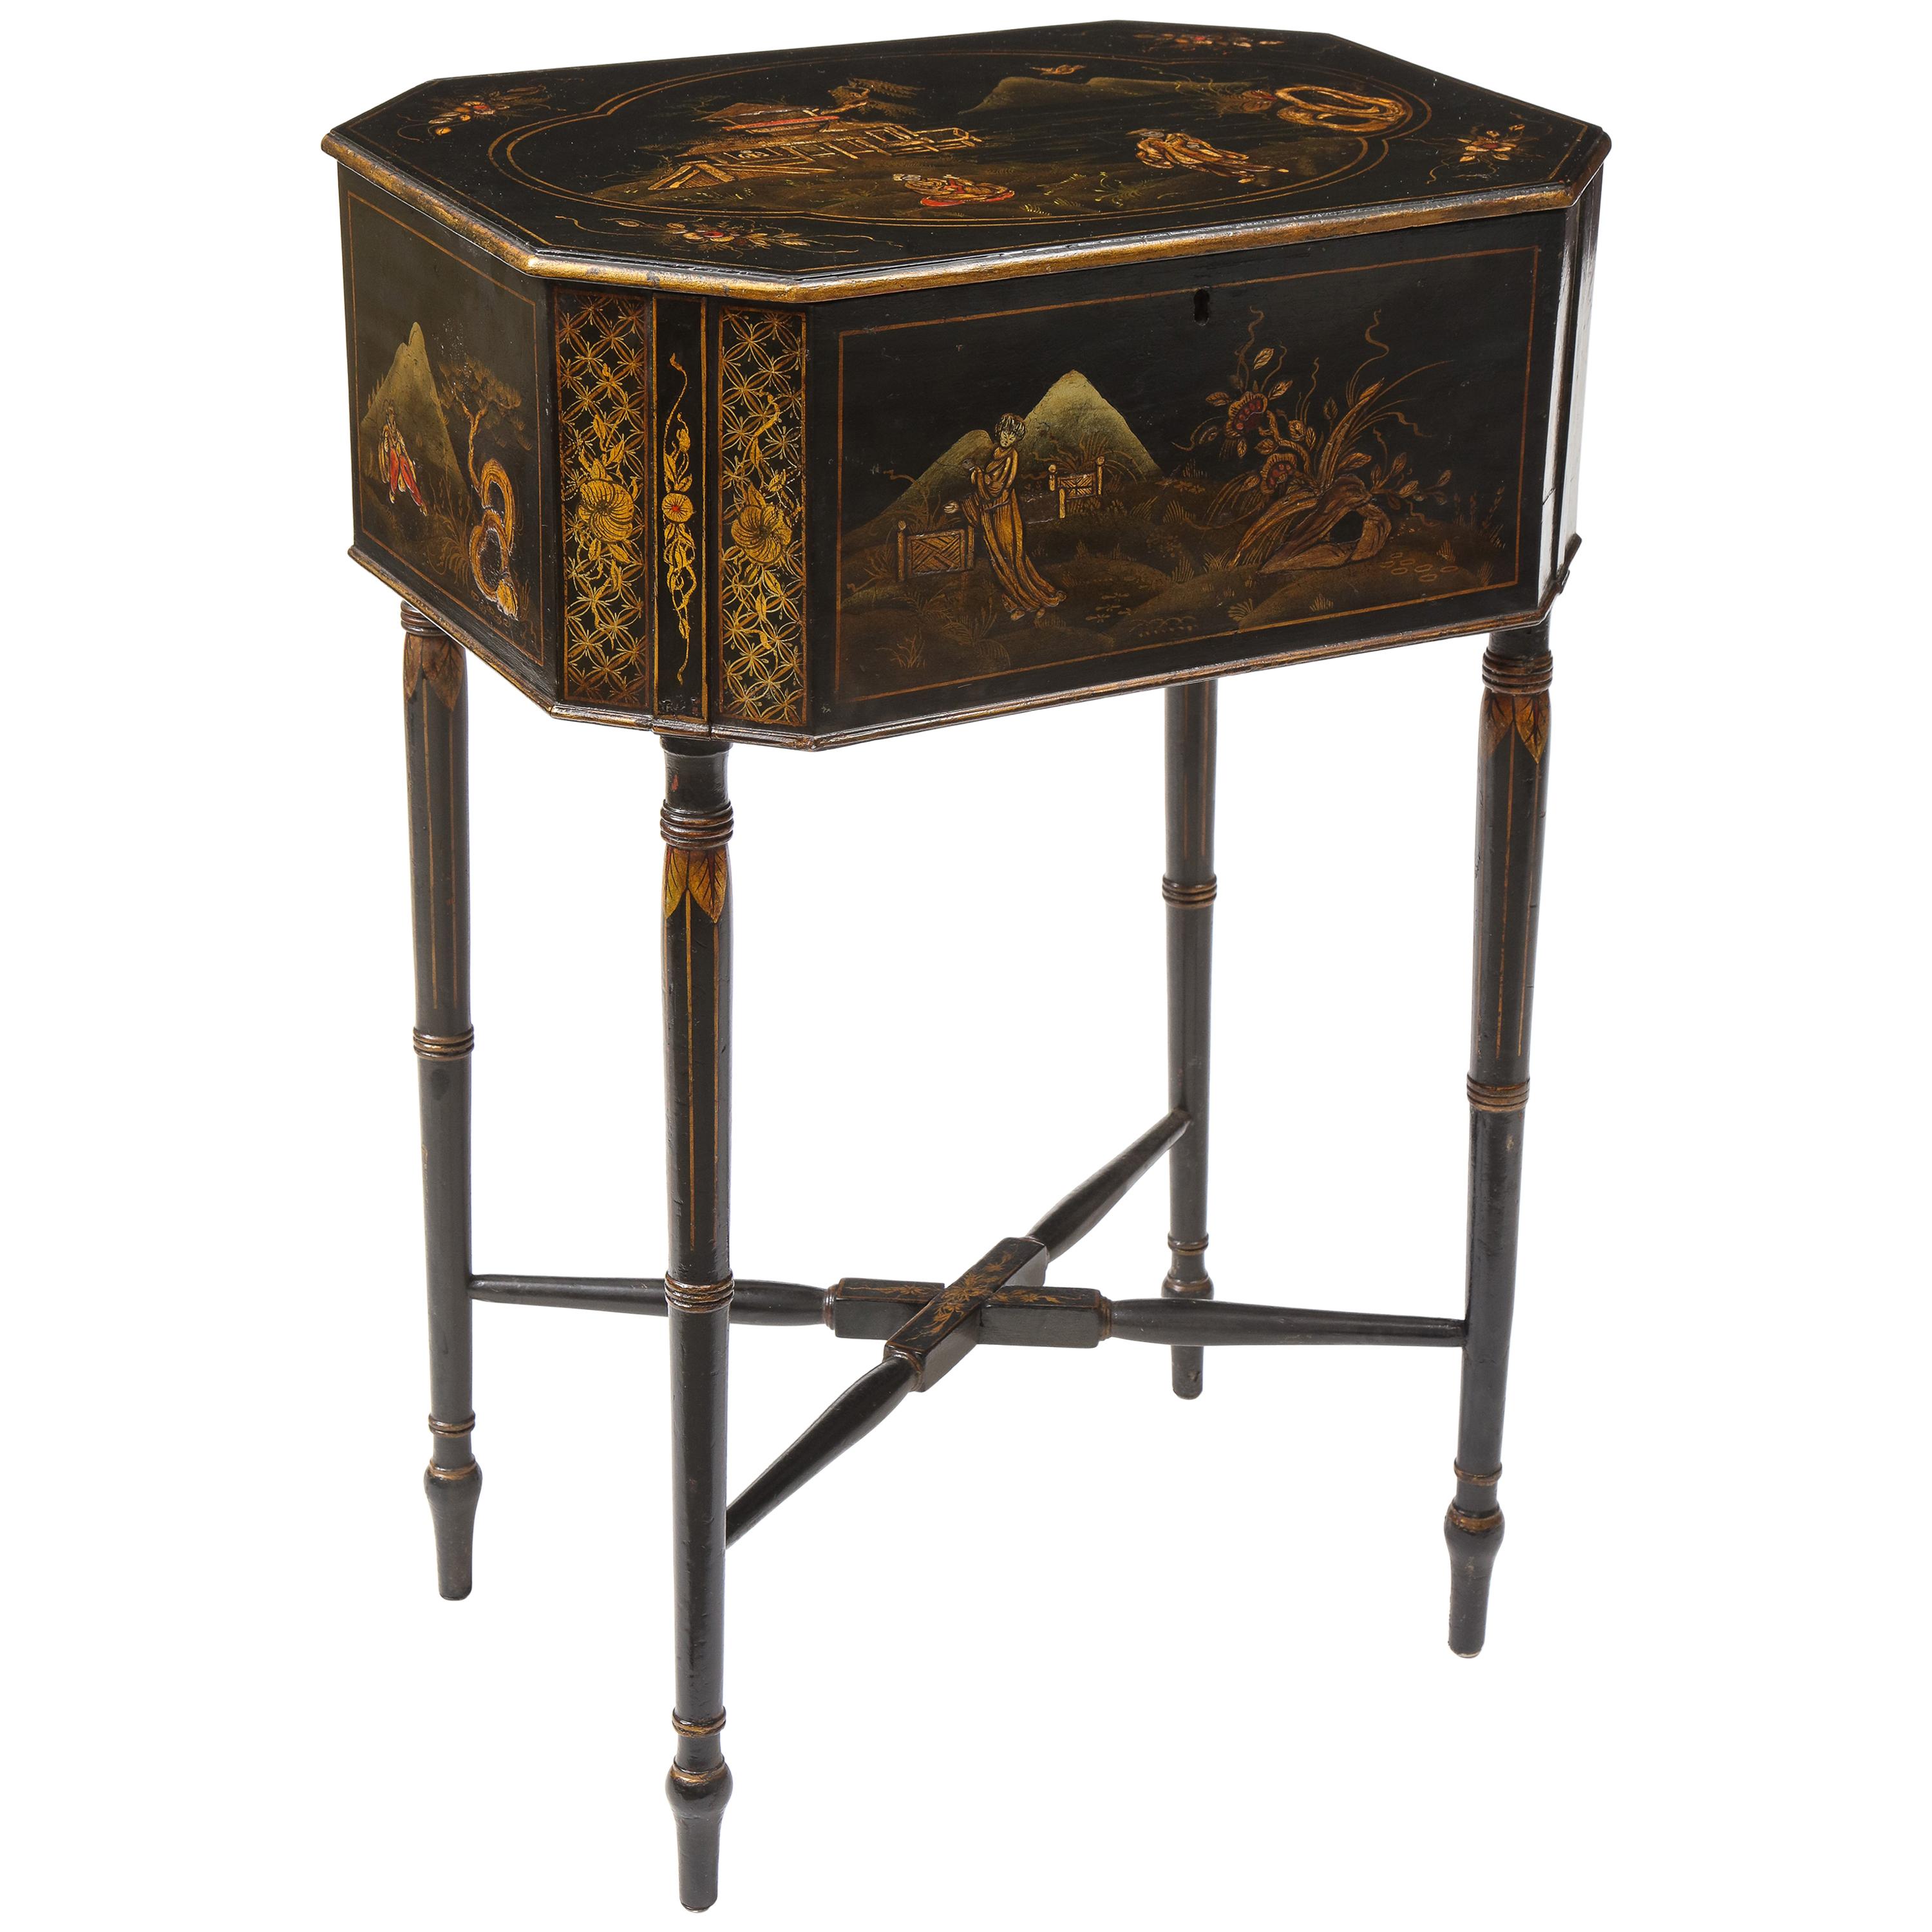 19th Century English Black Japanned Work Table